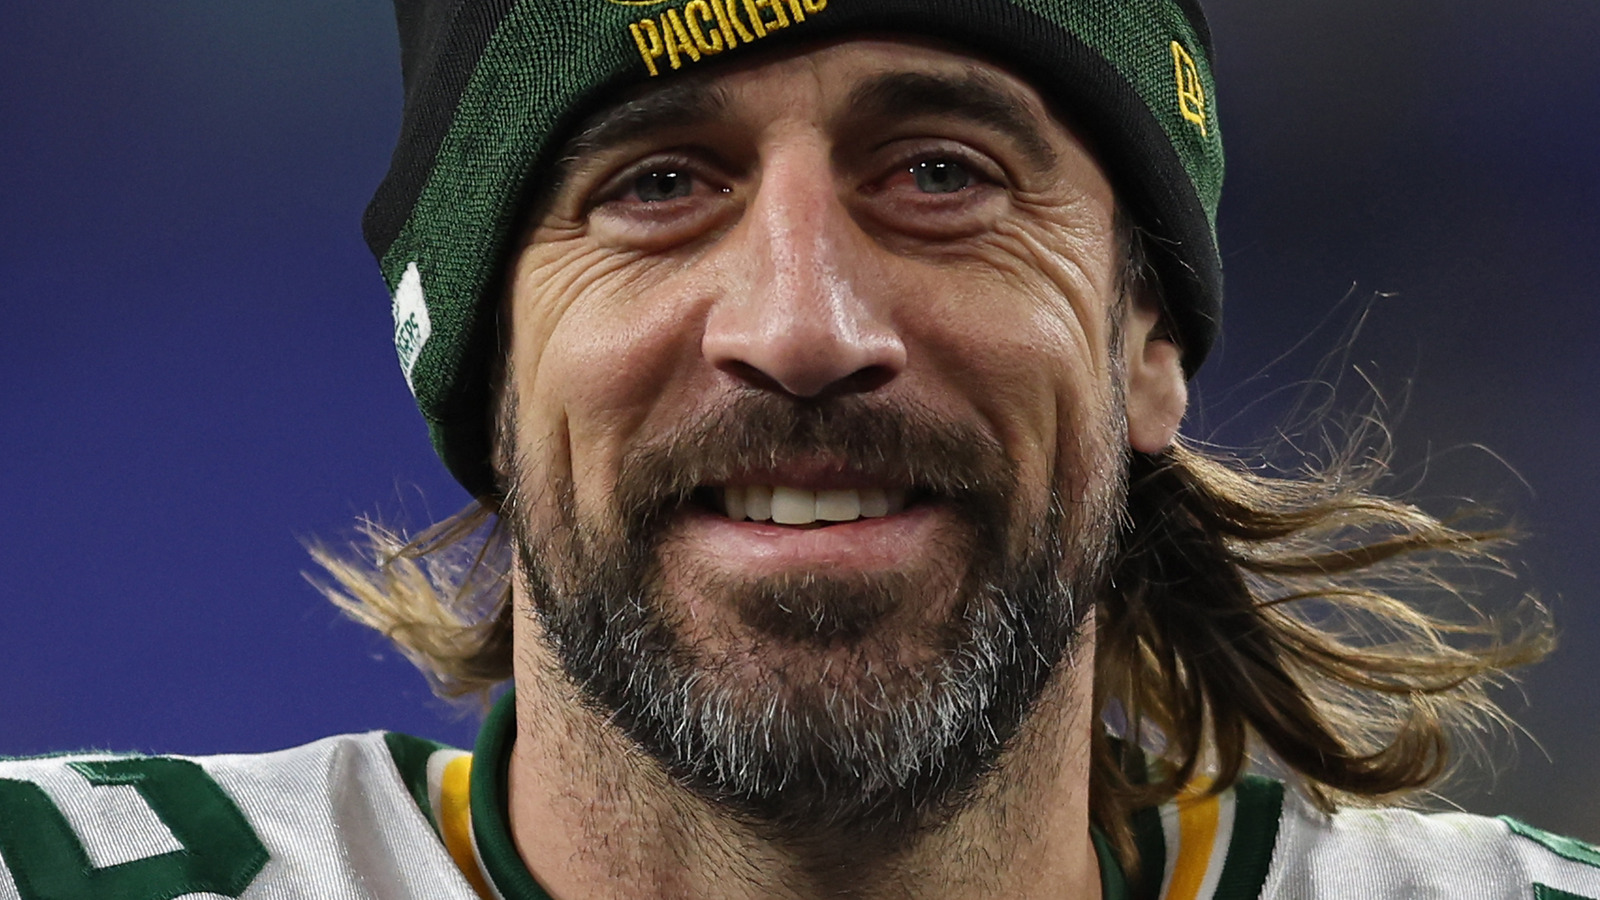 Aaron Rodgers' New Training Camp Look Has Everyone Saying The Same